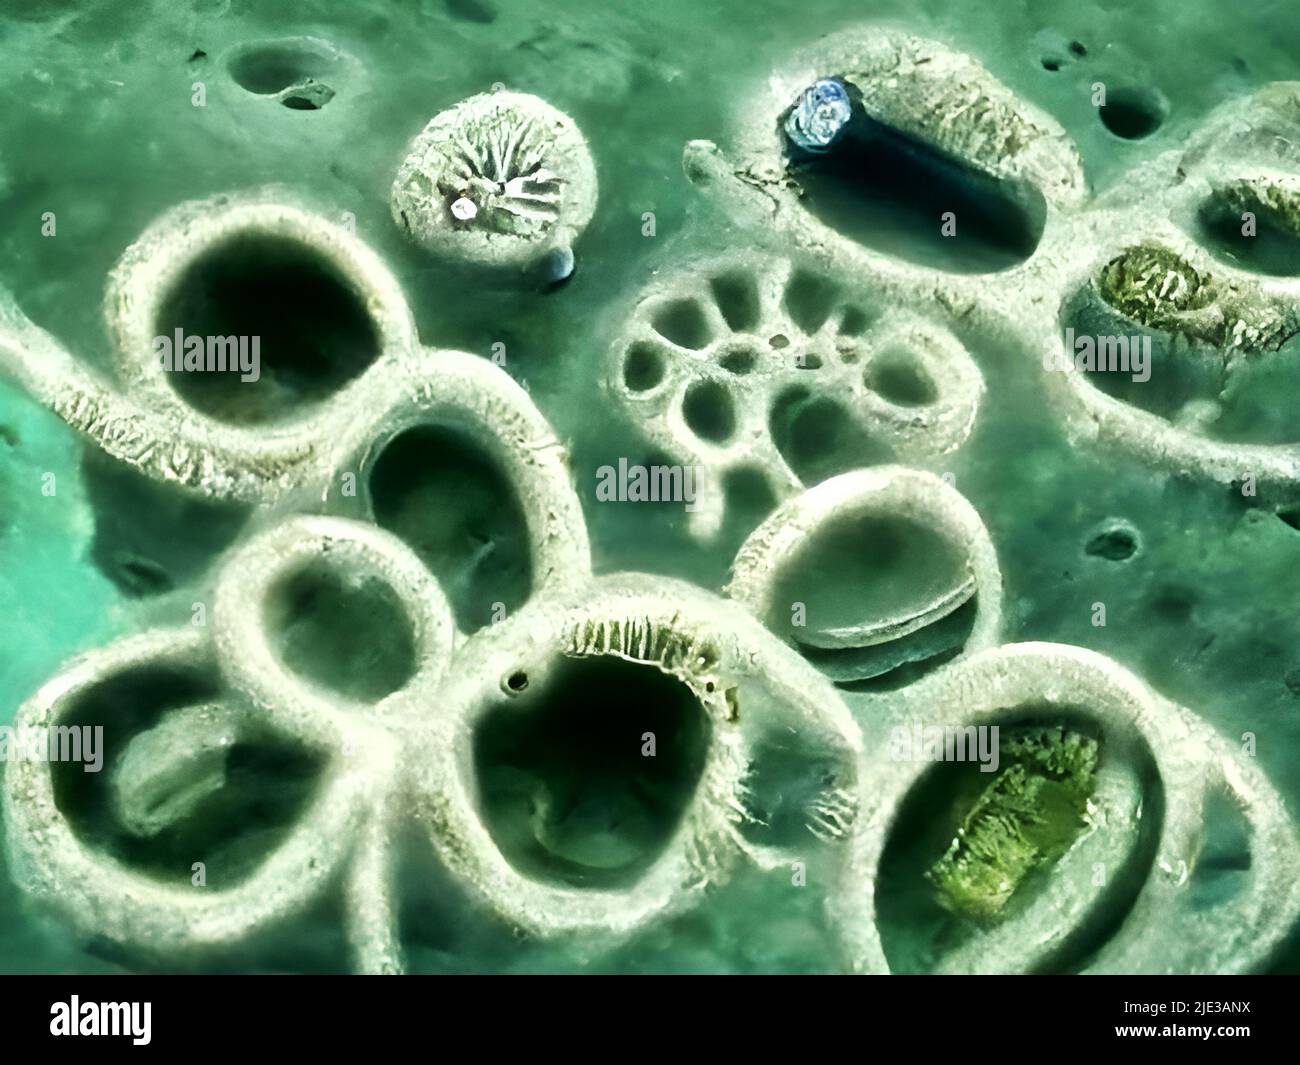 Cells under the microscope Stock Photo